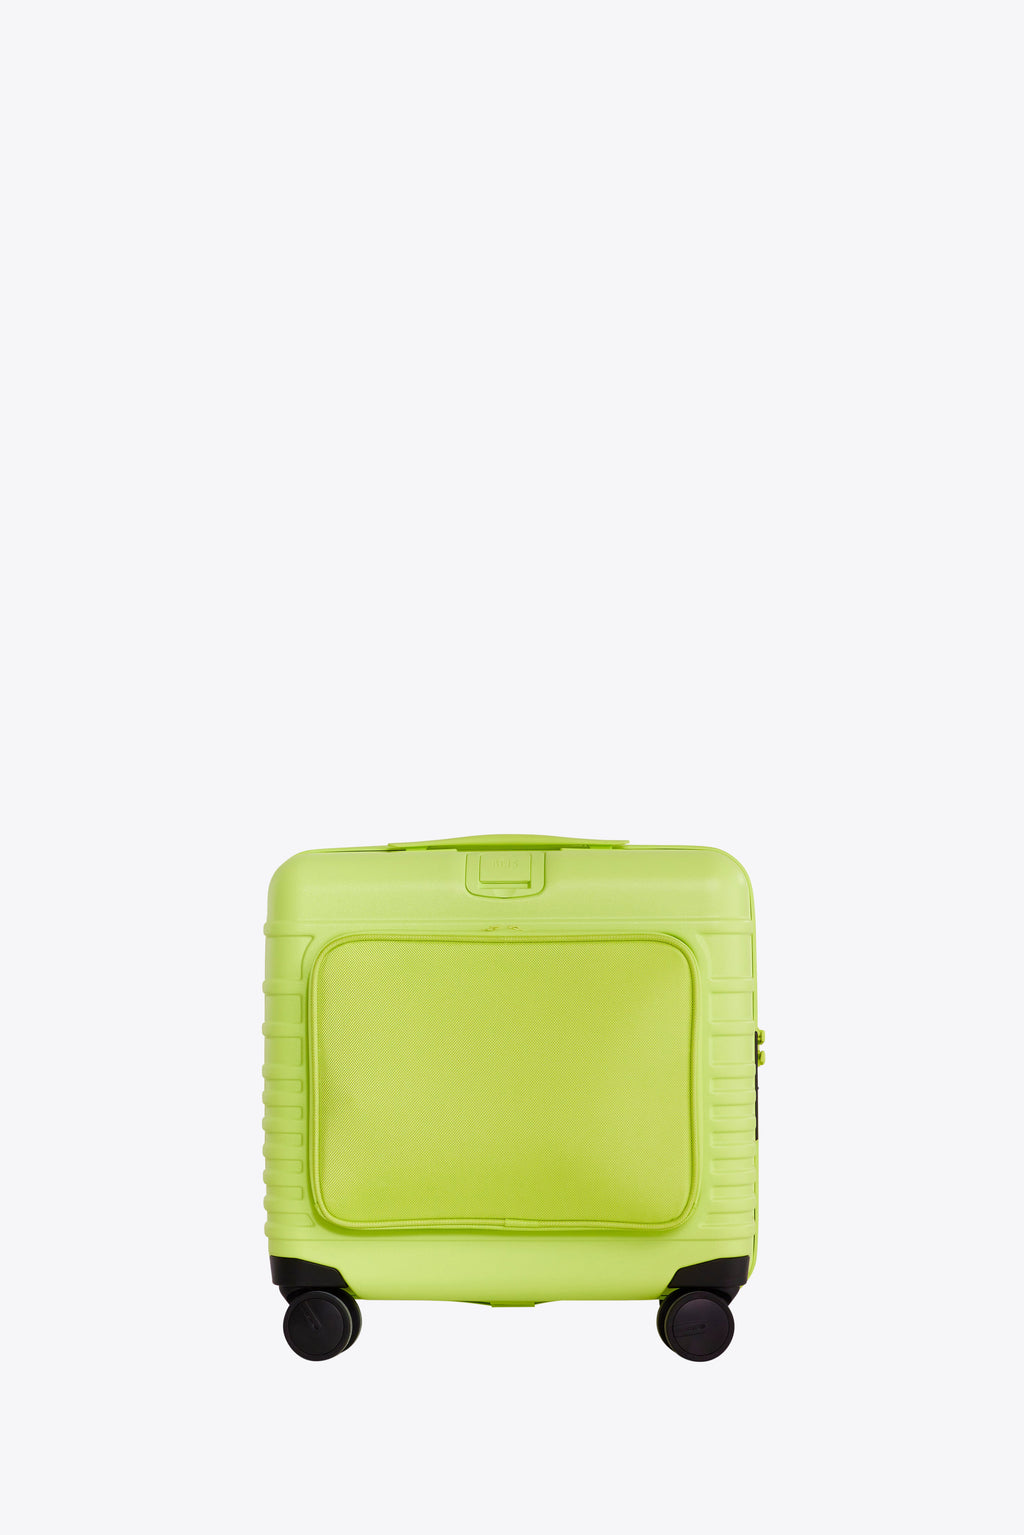 BÉIS 'The Kids Roller' in Citron - Kids Suitcases & Rolling